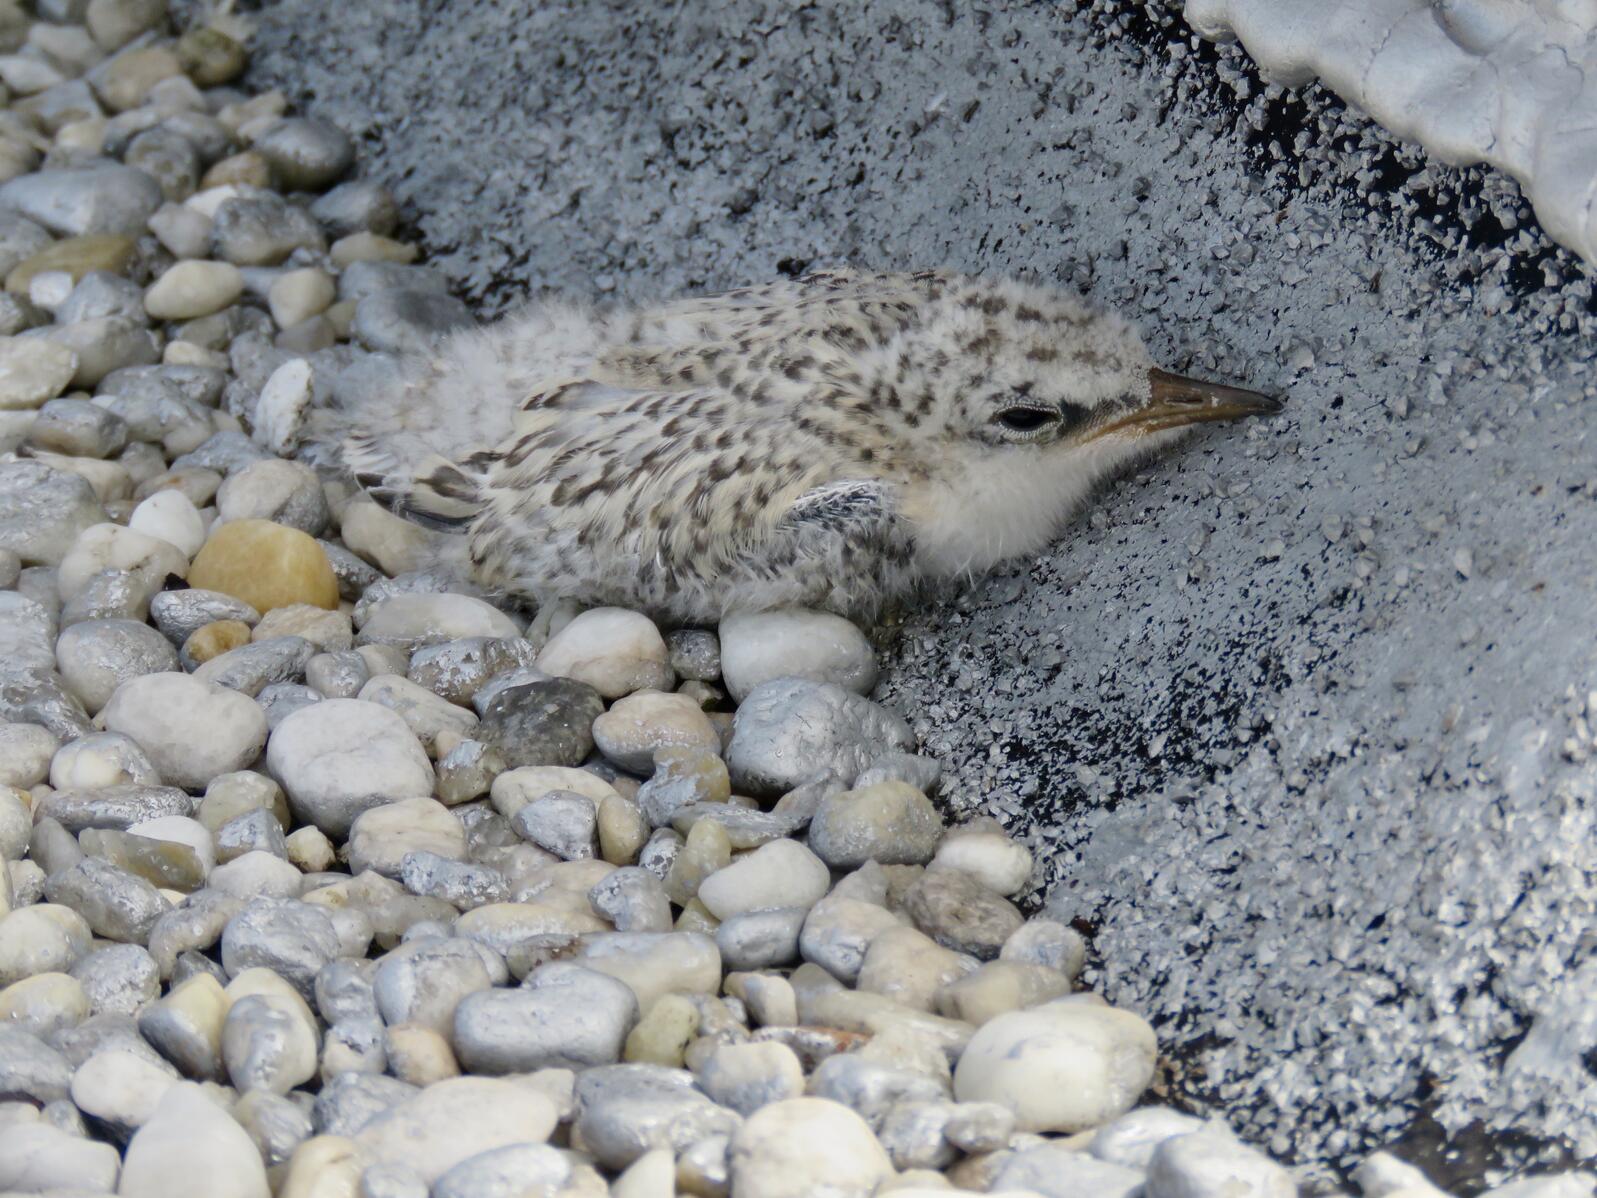 Least Tern chick on a rooftop.